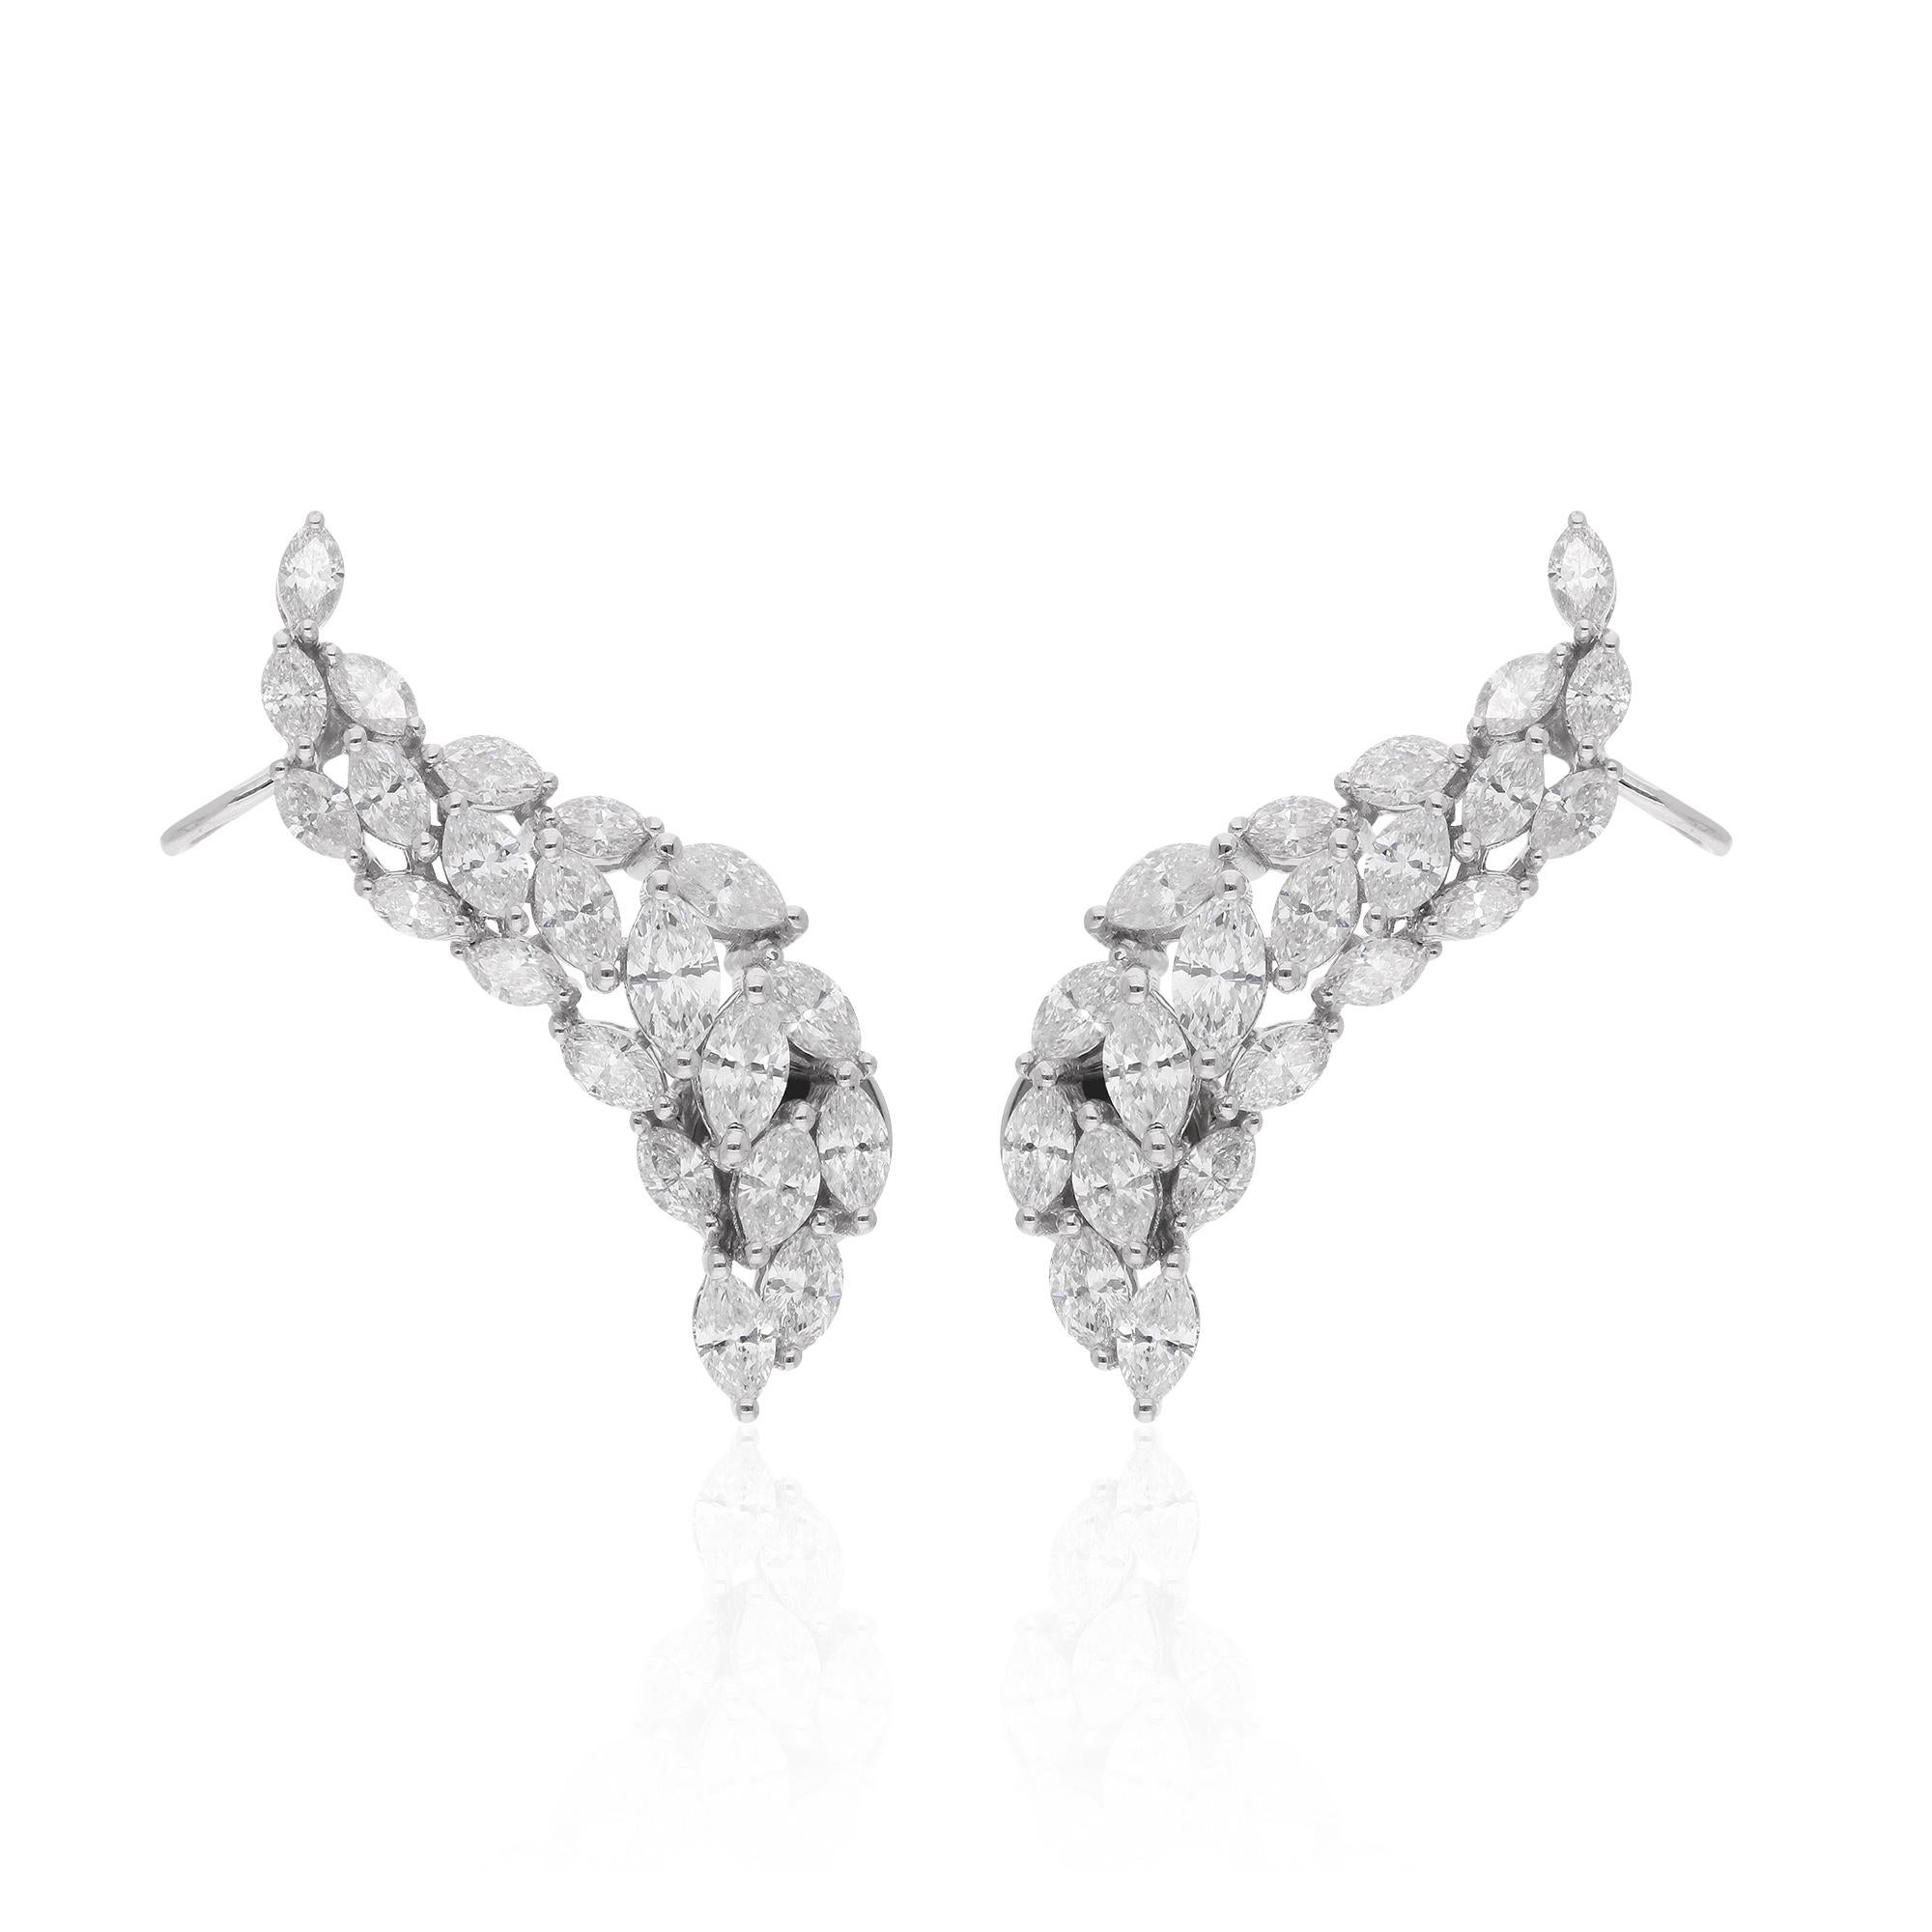 Introducing a stunning display of elegance and sophistication, behold these exquisite 2.91 carat Marquise Diamond Ear Cuff Earrings crafted in lustrous 14 karat white gold. Meticulously designed to captivate attention and elevate any ensemble, these